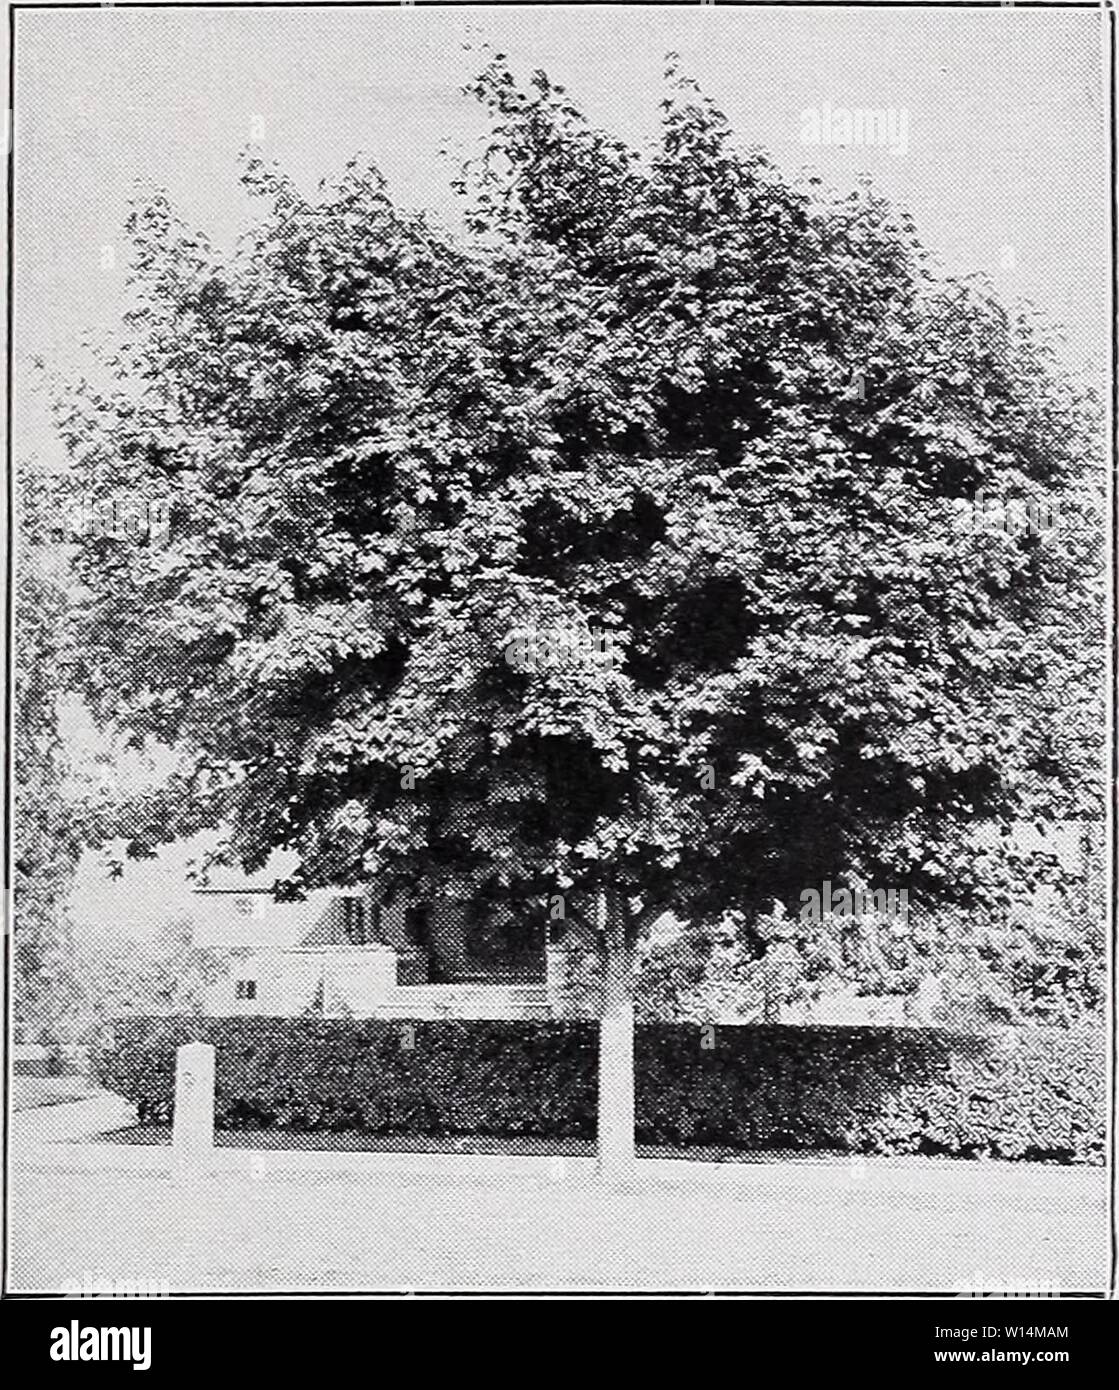 Archive image from page 20 of Descriptive price list (1935). Descriptive price list . descriptiveprice00cmho 1 Year: 1935  C. M. HOBBS 3c SONS, INC., BRIDGEPORT, INDIANA    Ailanthus Acer Schwedleri. ACER—Continued. A. rubrum (Red Maple). Becomes a large tree. Leaves have five unequal lobes, green above, pale or bluish beneath, turning to bright scarlet in the fall ; flowers red or scarlet, fruits red. Valuable for park or street plant- ing. Does well in wet locations. Each 6 to 8 ft $2.00 8 to 10 ft 3.00 A. saccharum (Sugar or Rock Maple). This is one of the most desirable shade and orna- men Stock Photo